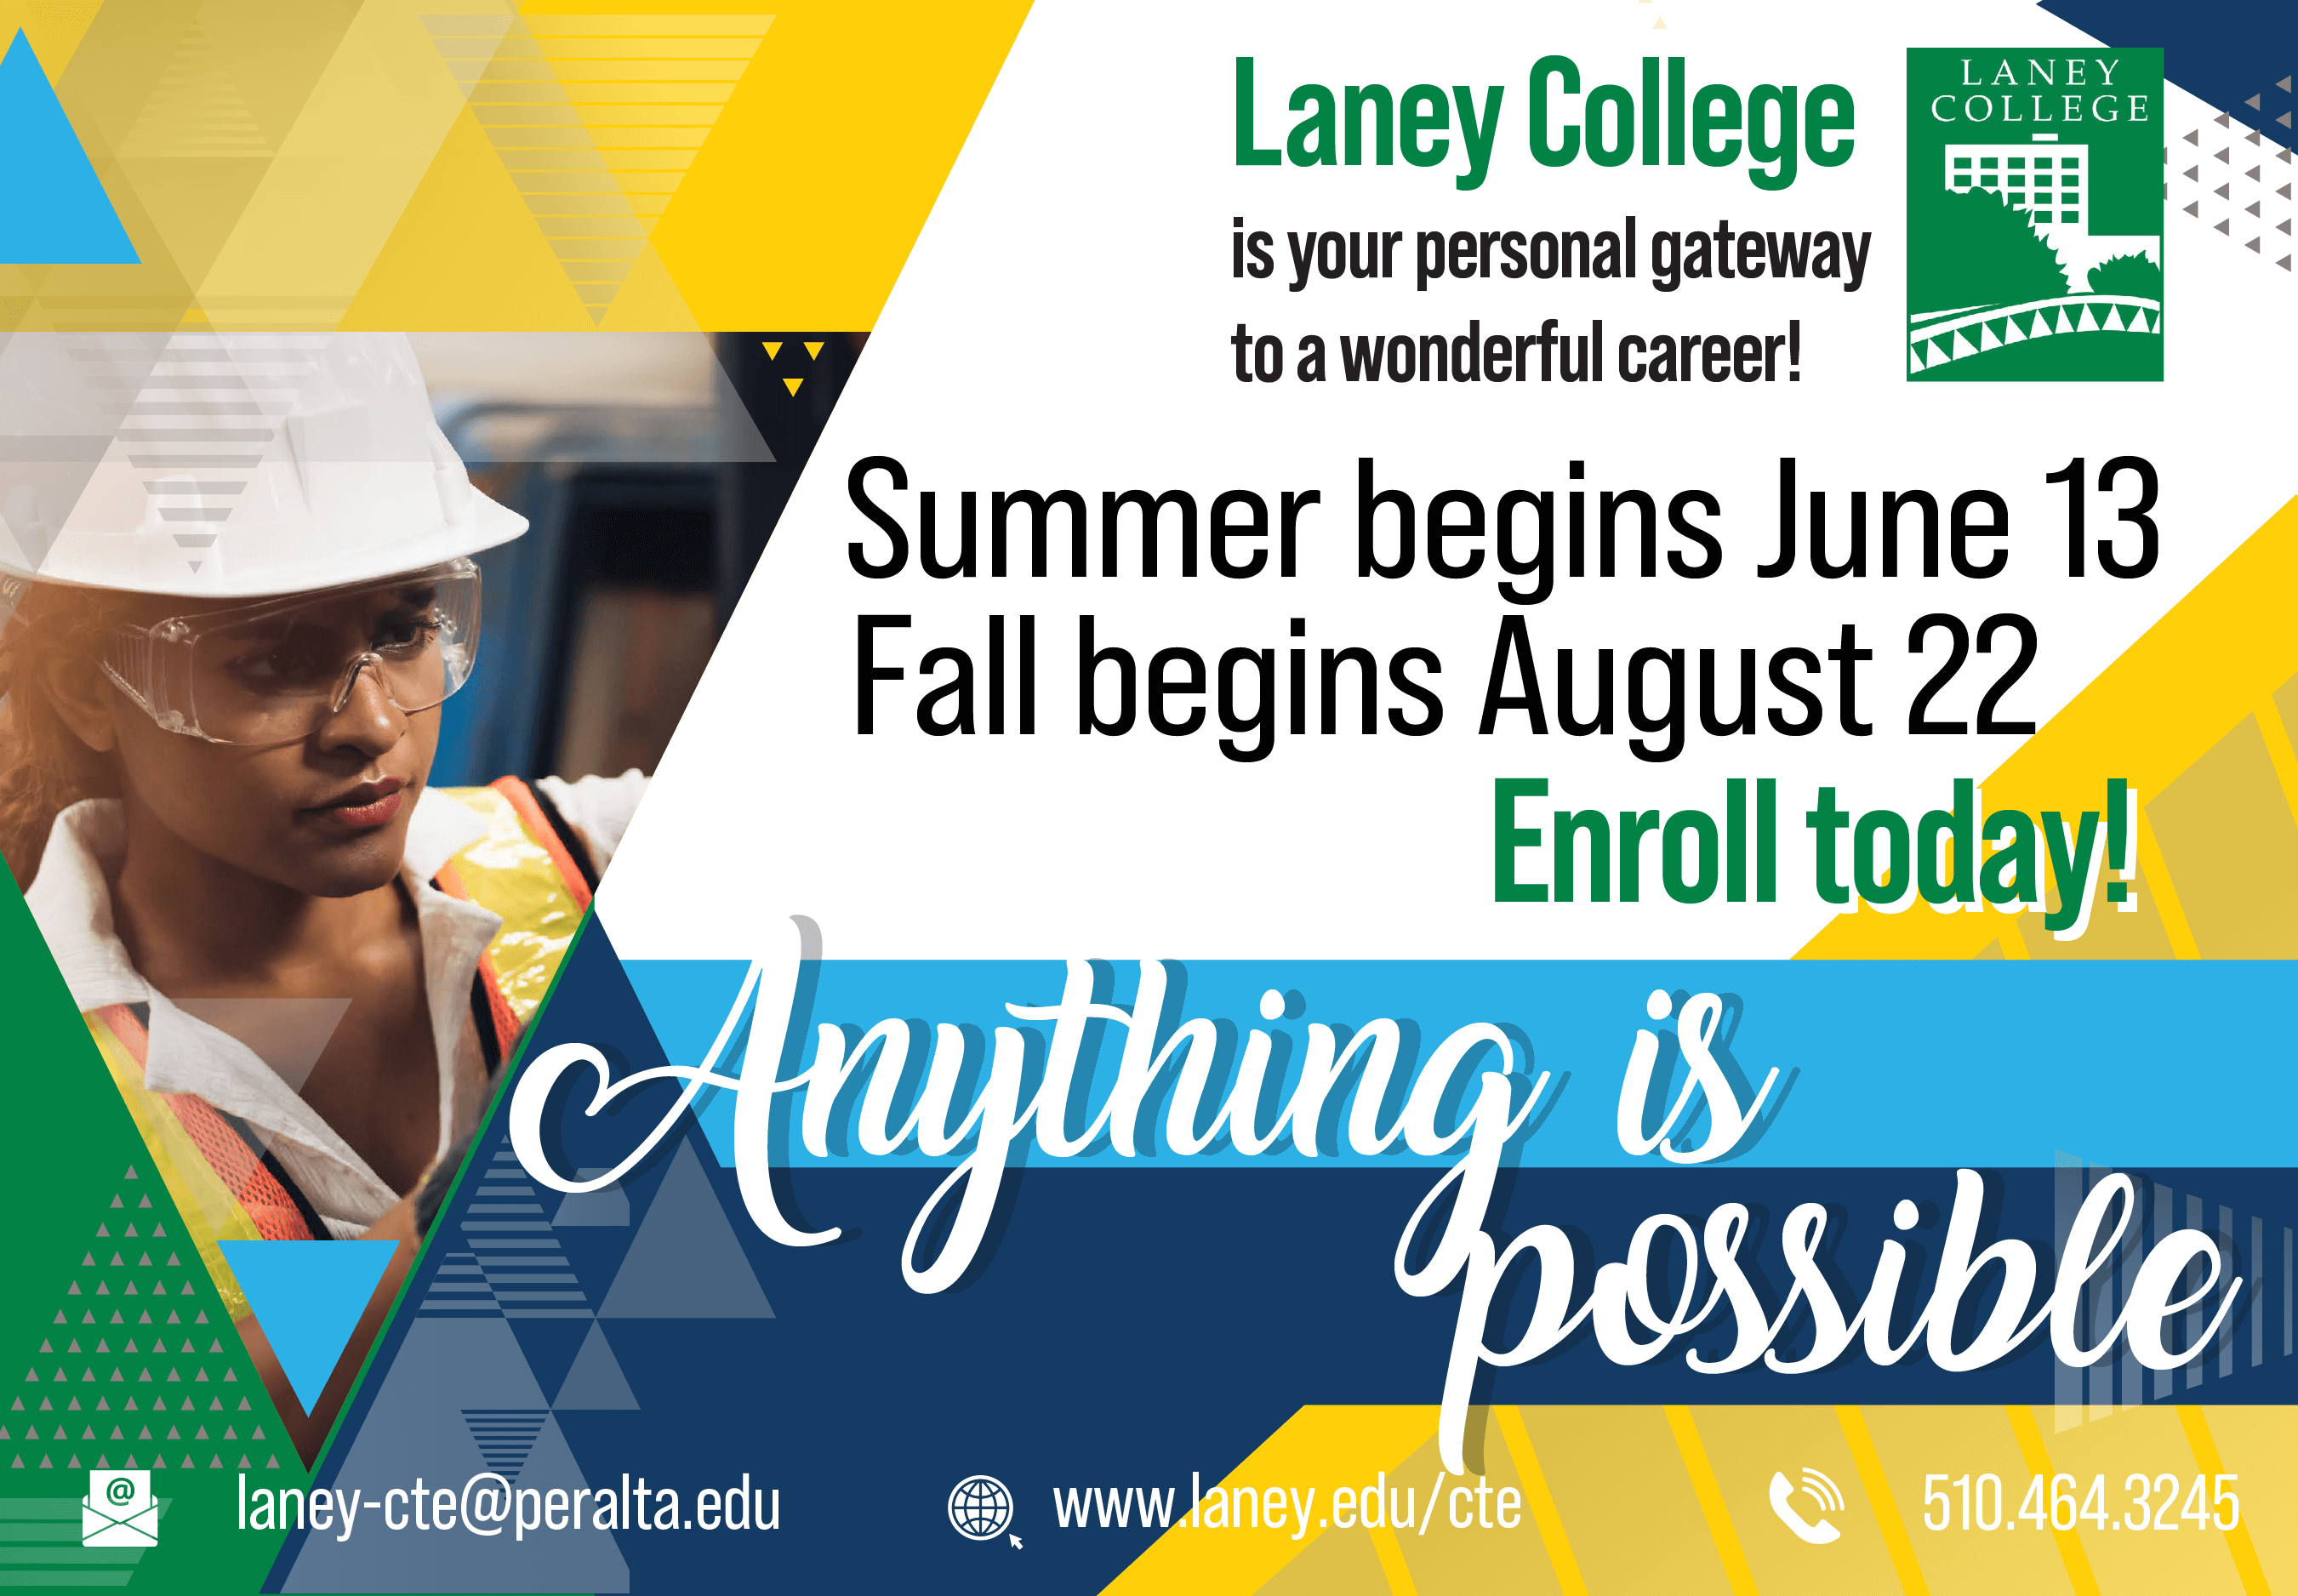 Summer begins June 13 and Fall begins August 22, Enroll today